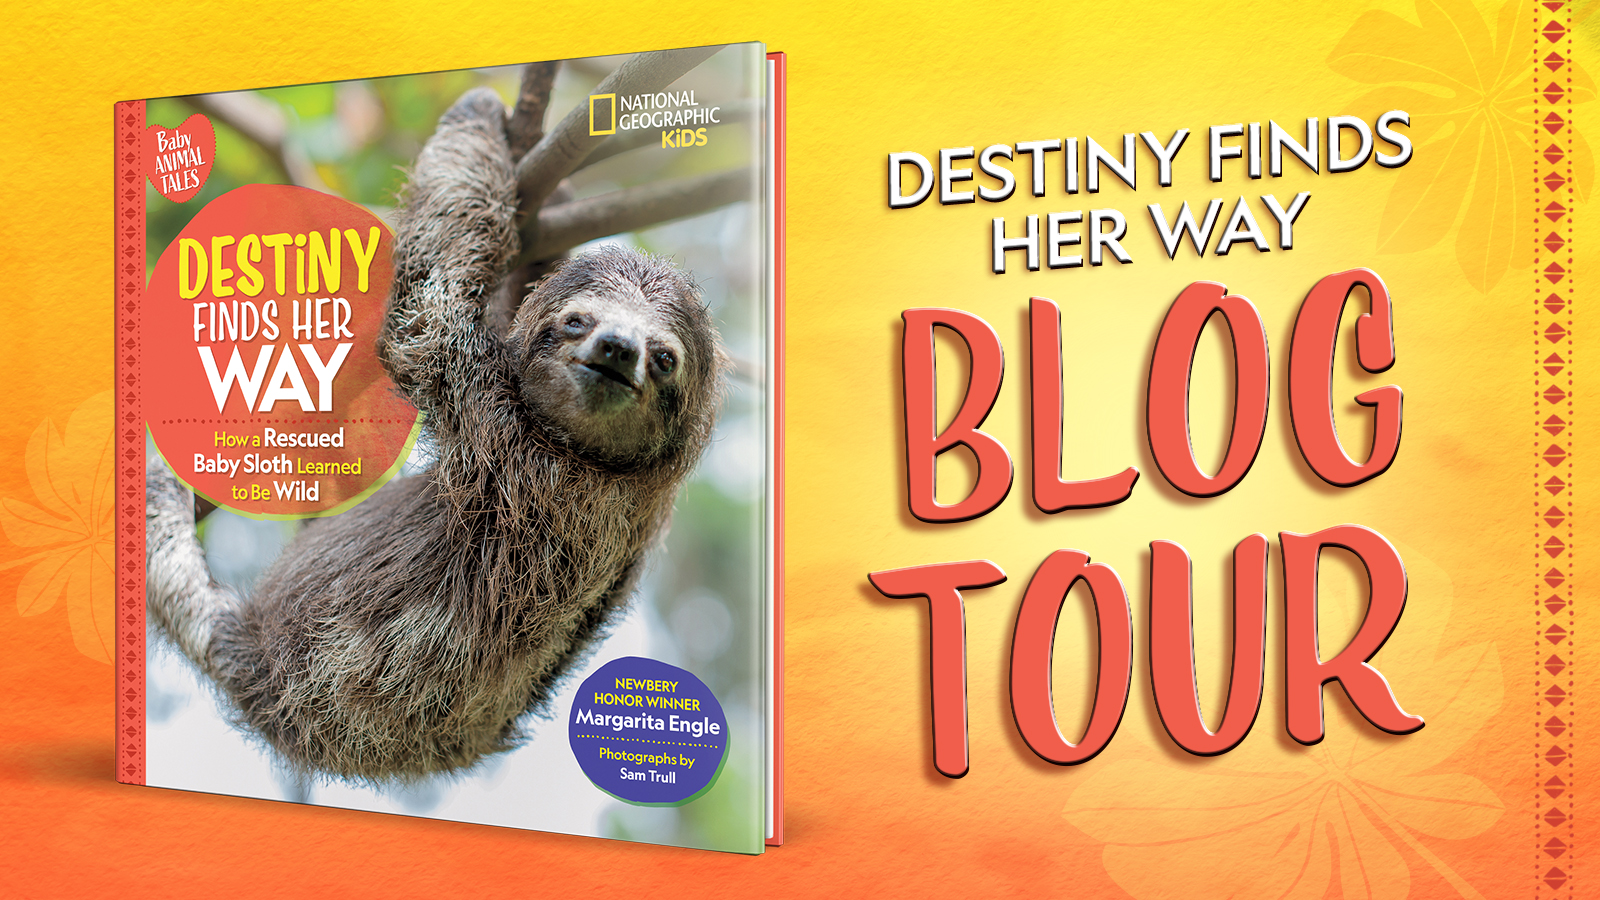 How to Be a Sloth Tourist + Destiny Finds Her Way Giveaway!